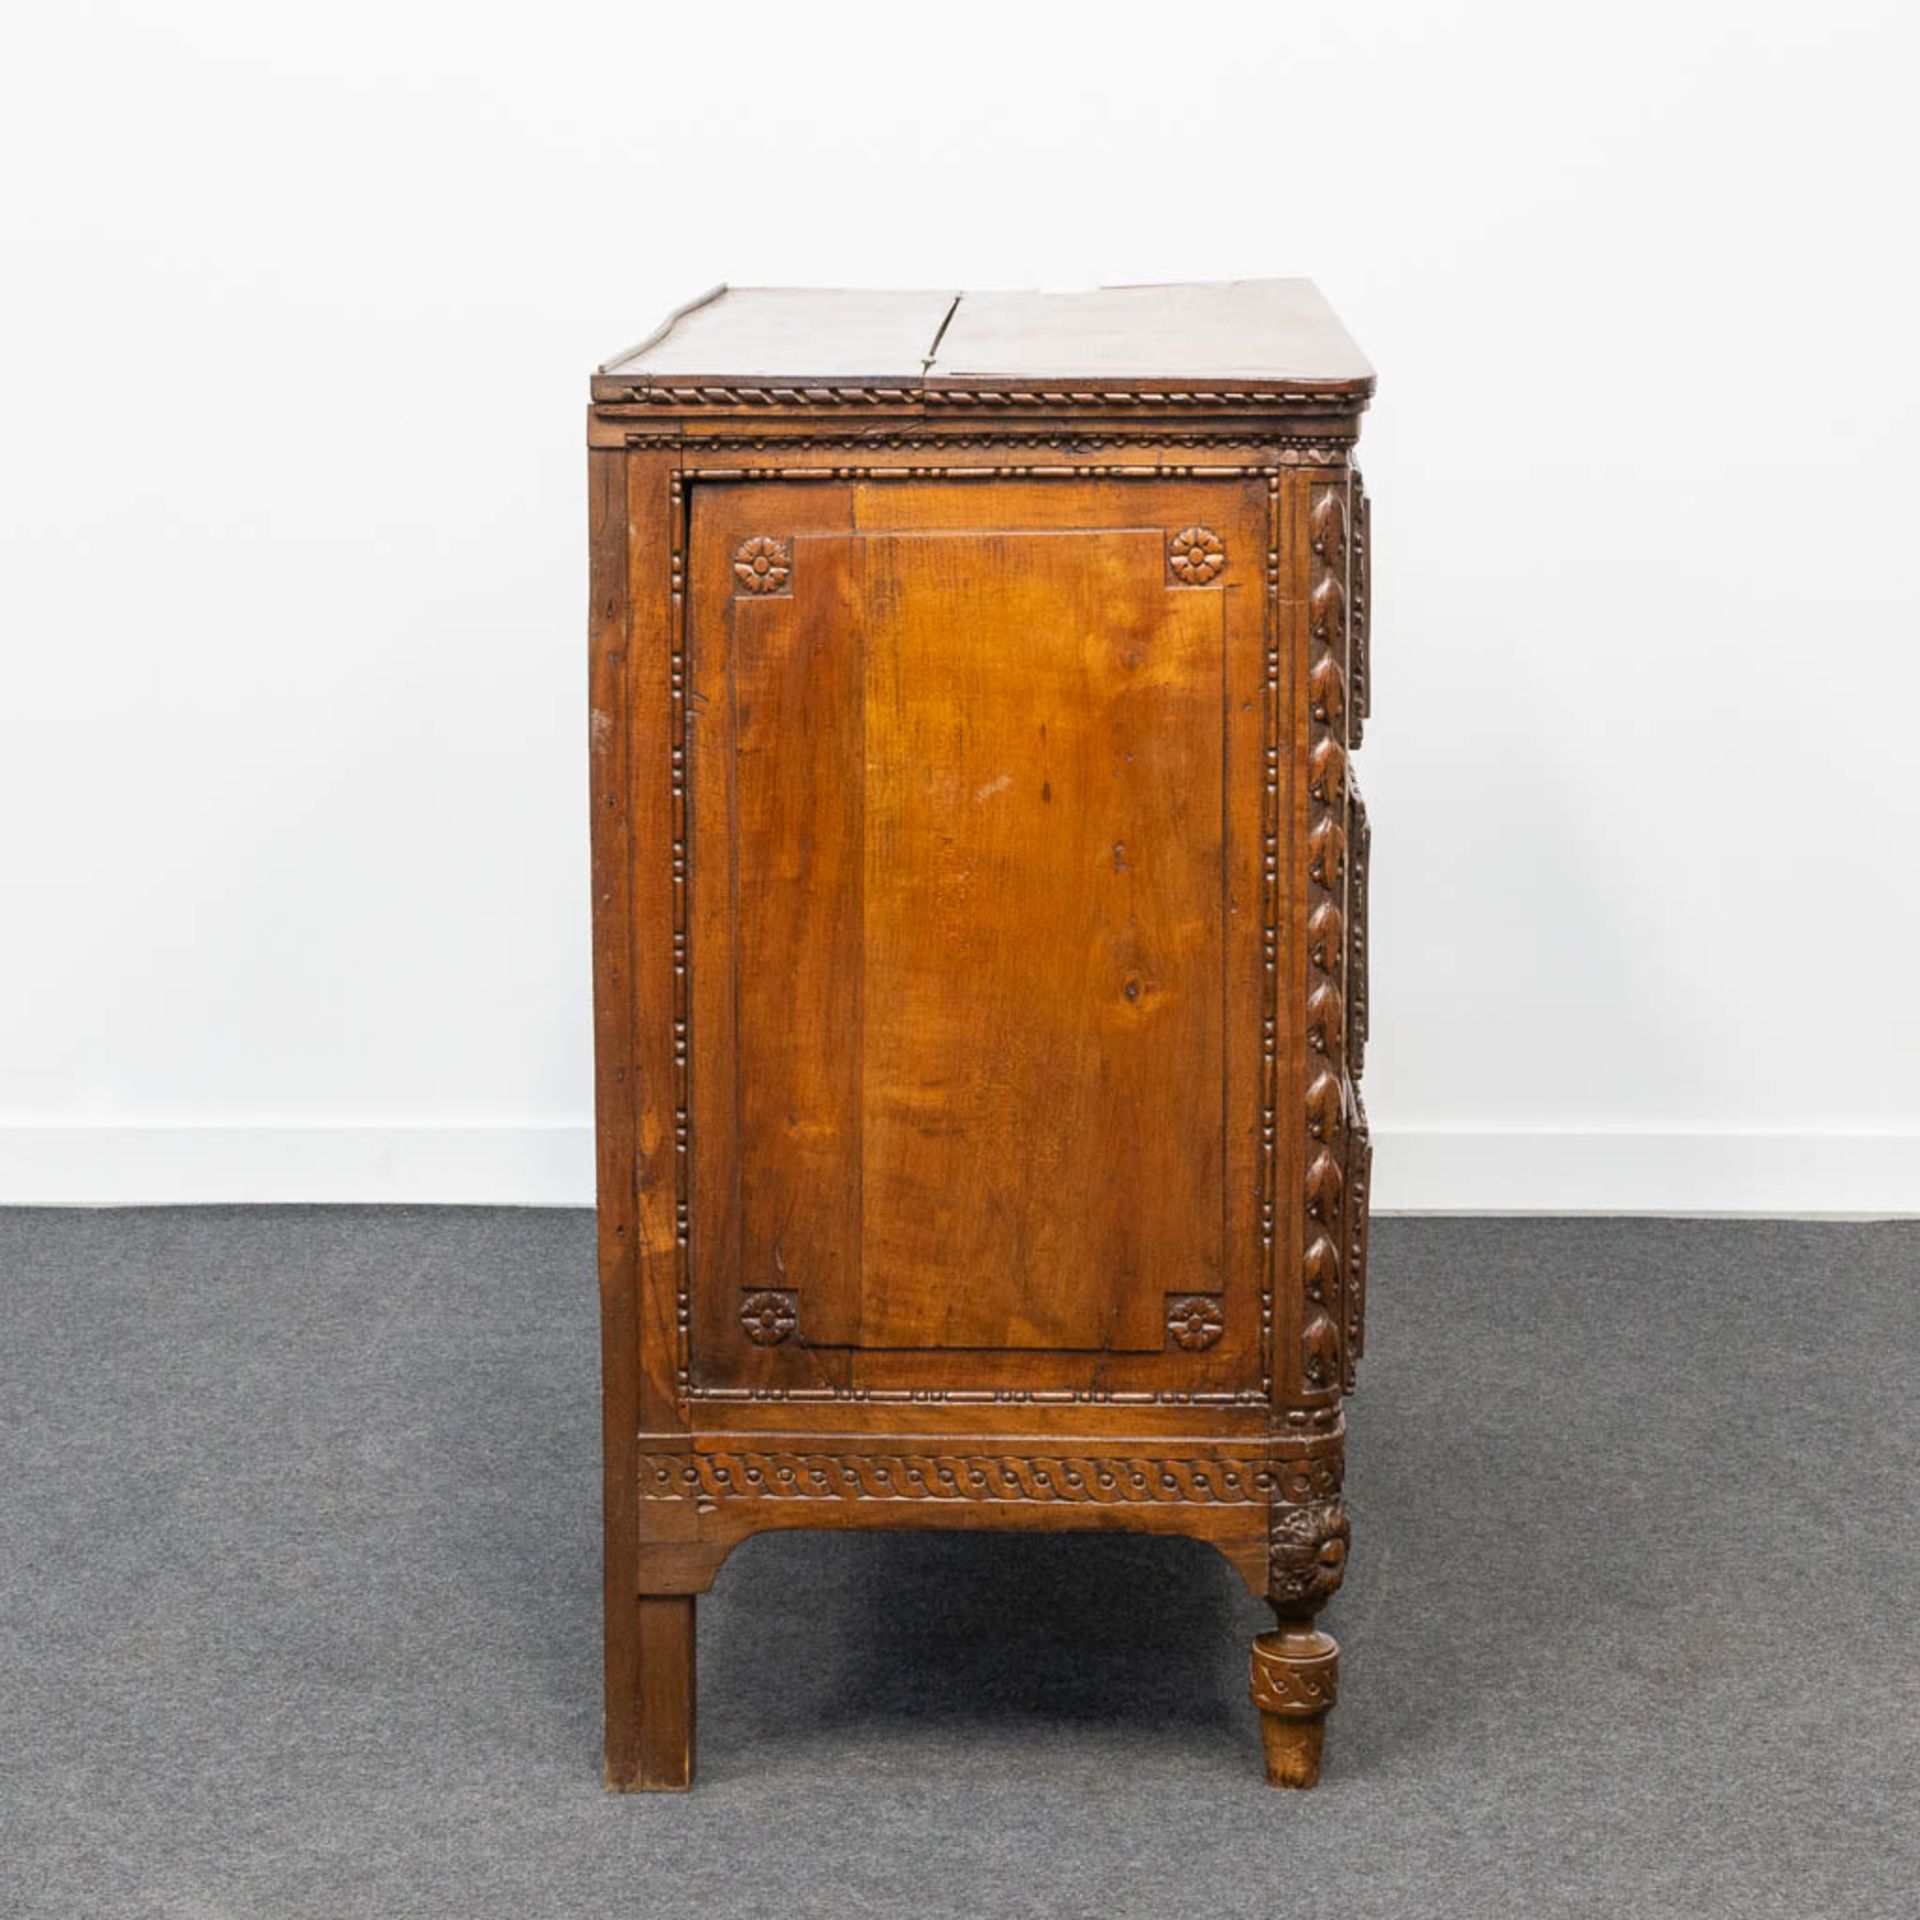 A wood sculptured commode in Louis XVI style, with 3 drawers and a hidden desk. 18th century. - Image 5 of 23